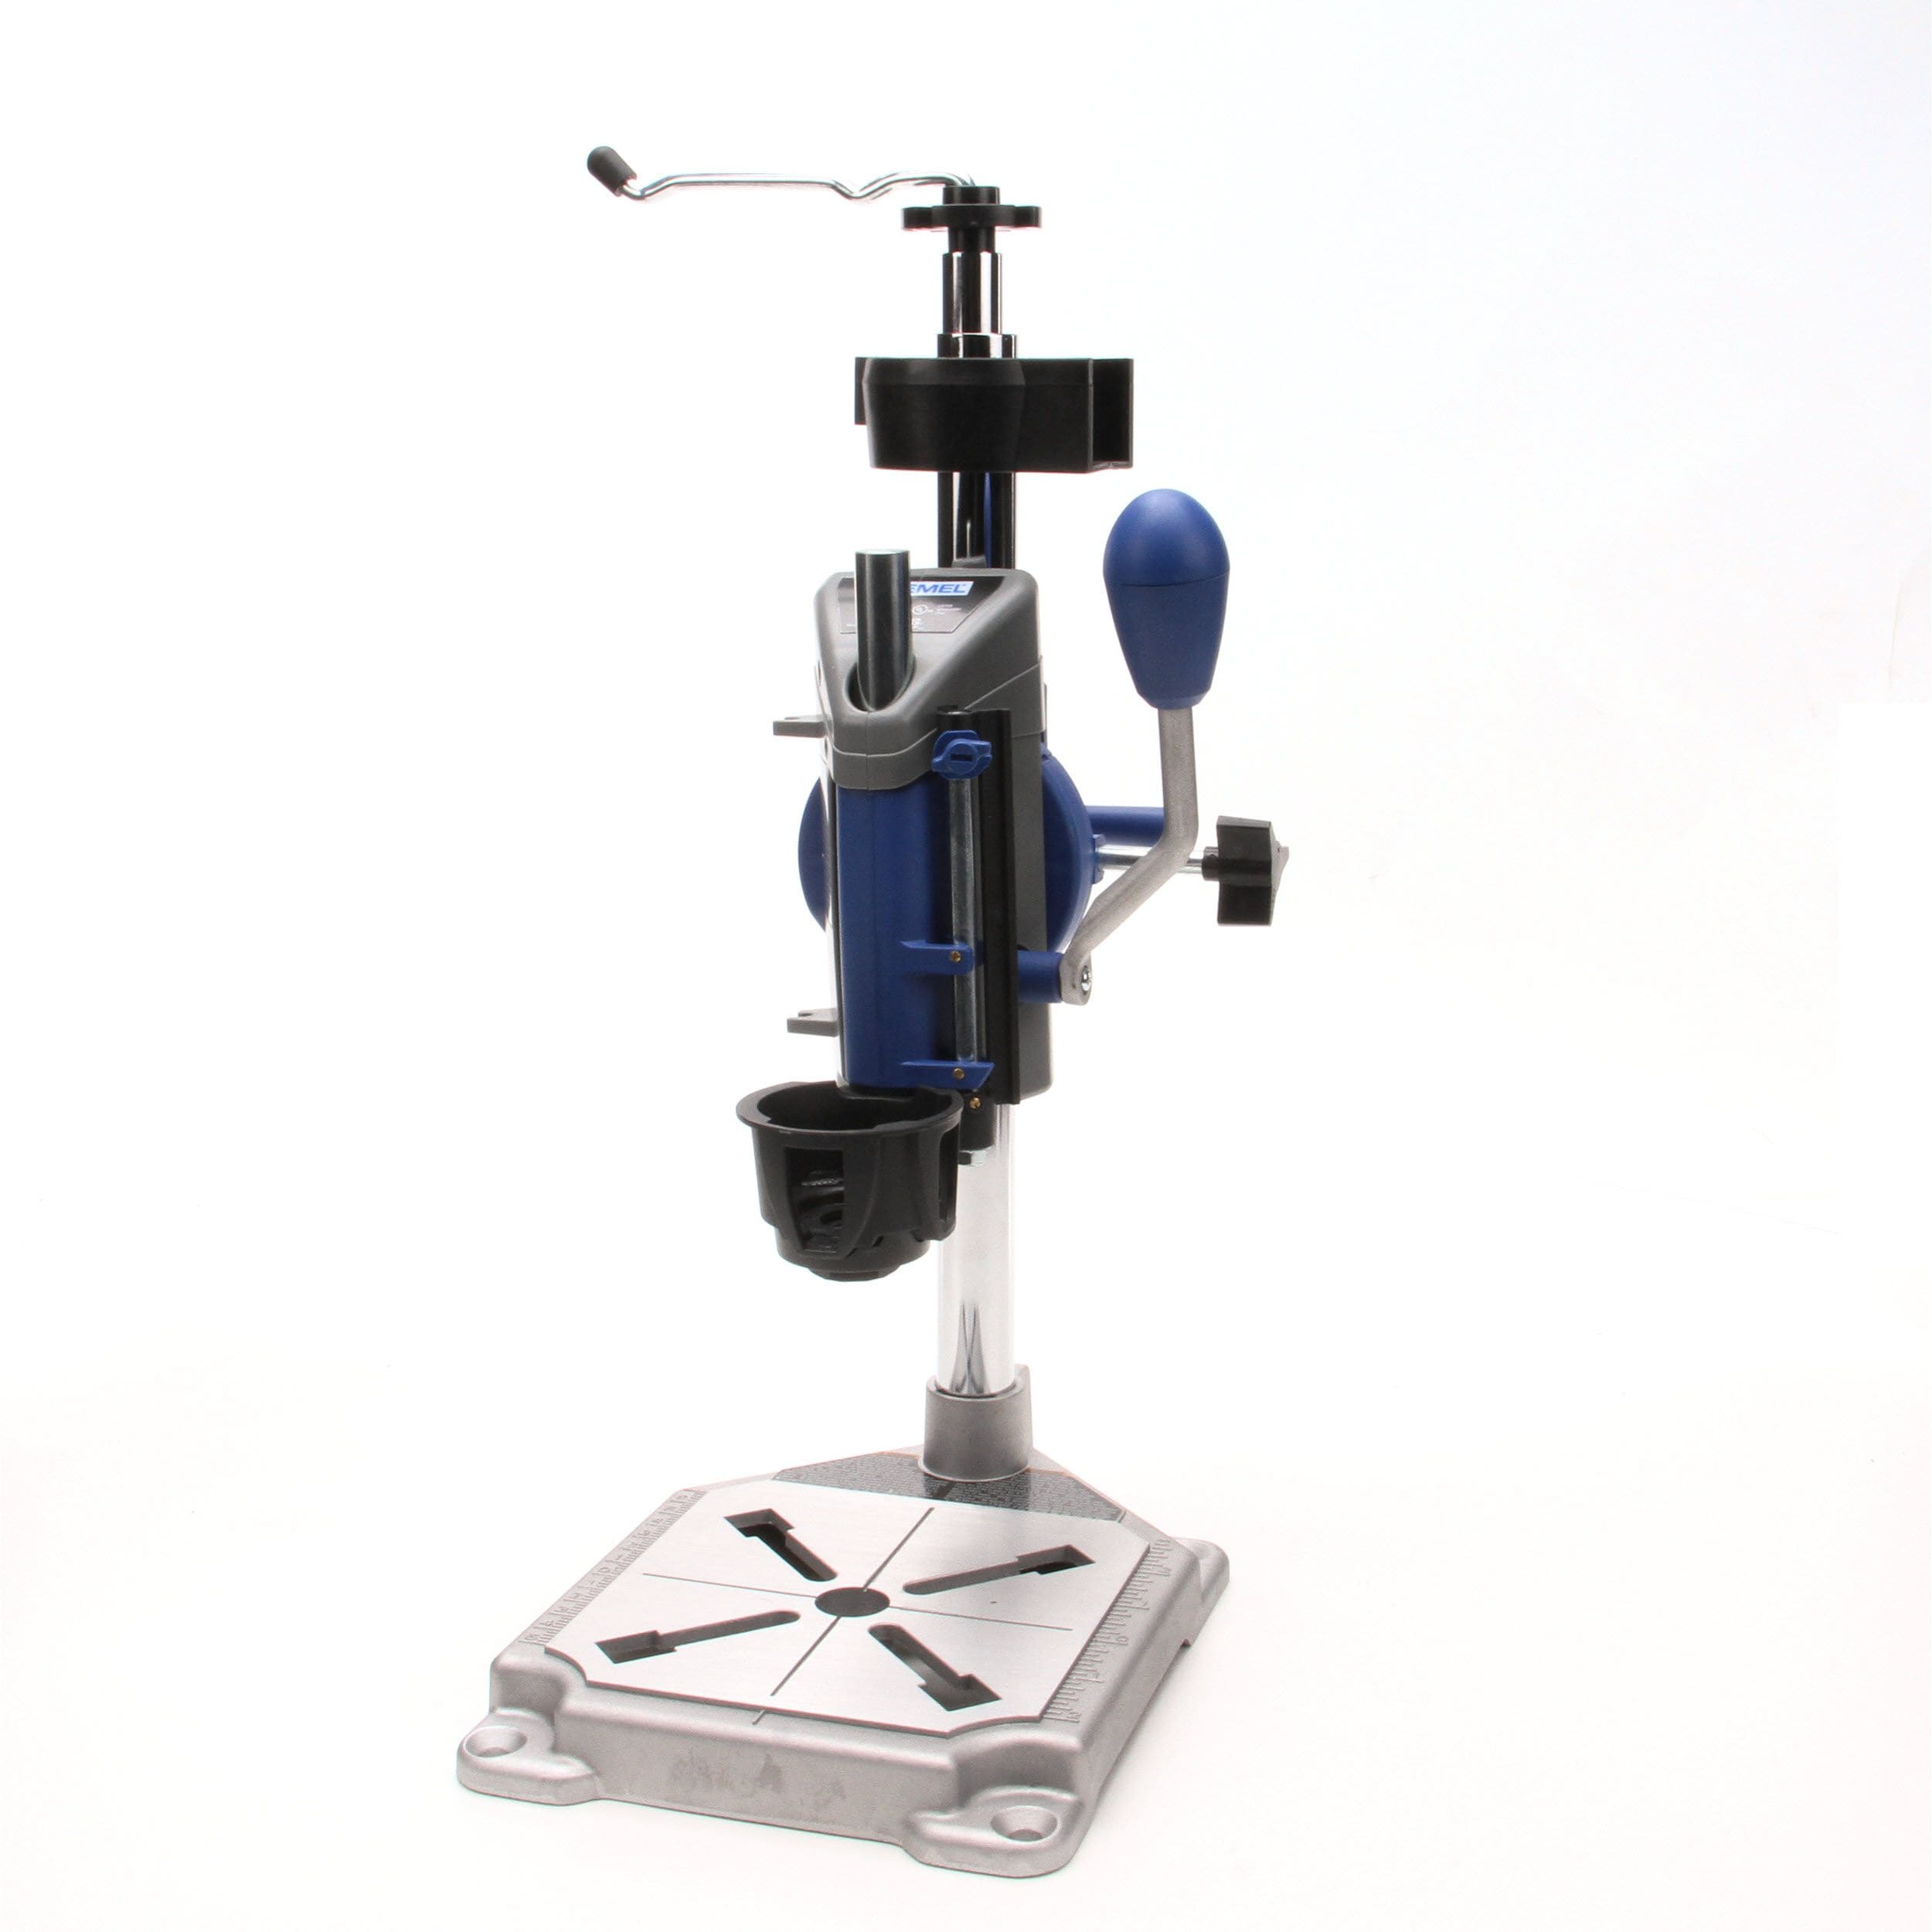 Dremel Work Station, Item 220-01, combines a drill press, rotary